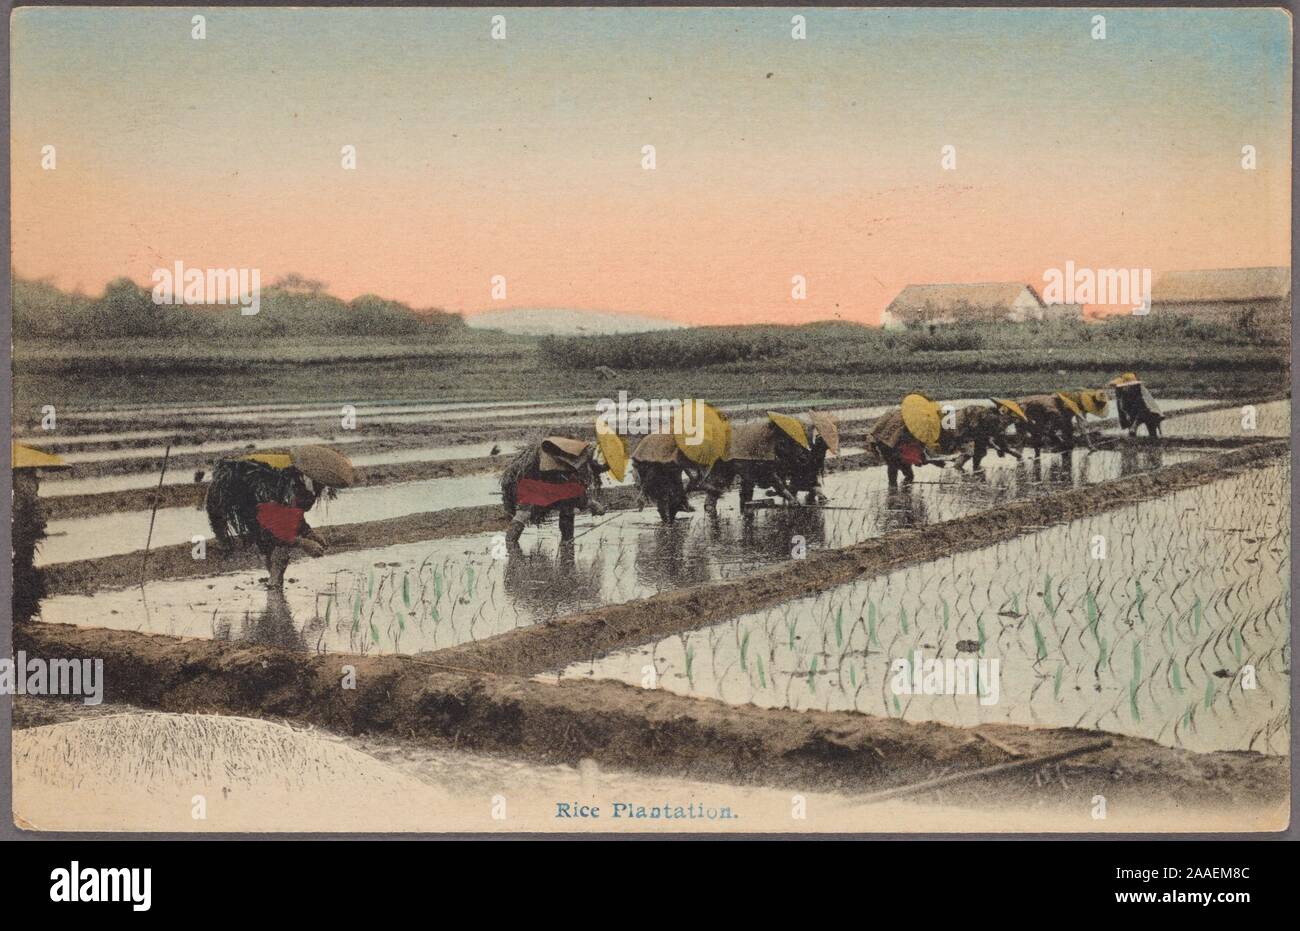 Illustrated postcard of a group of Japanese farmers wearing traditional straw hats planting rice in rice paddies, Japan, 1915. From the New York Public Library. () Stock Photo